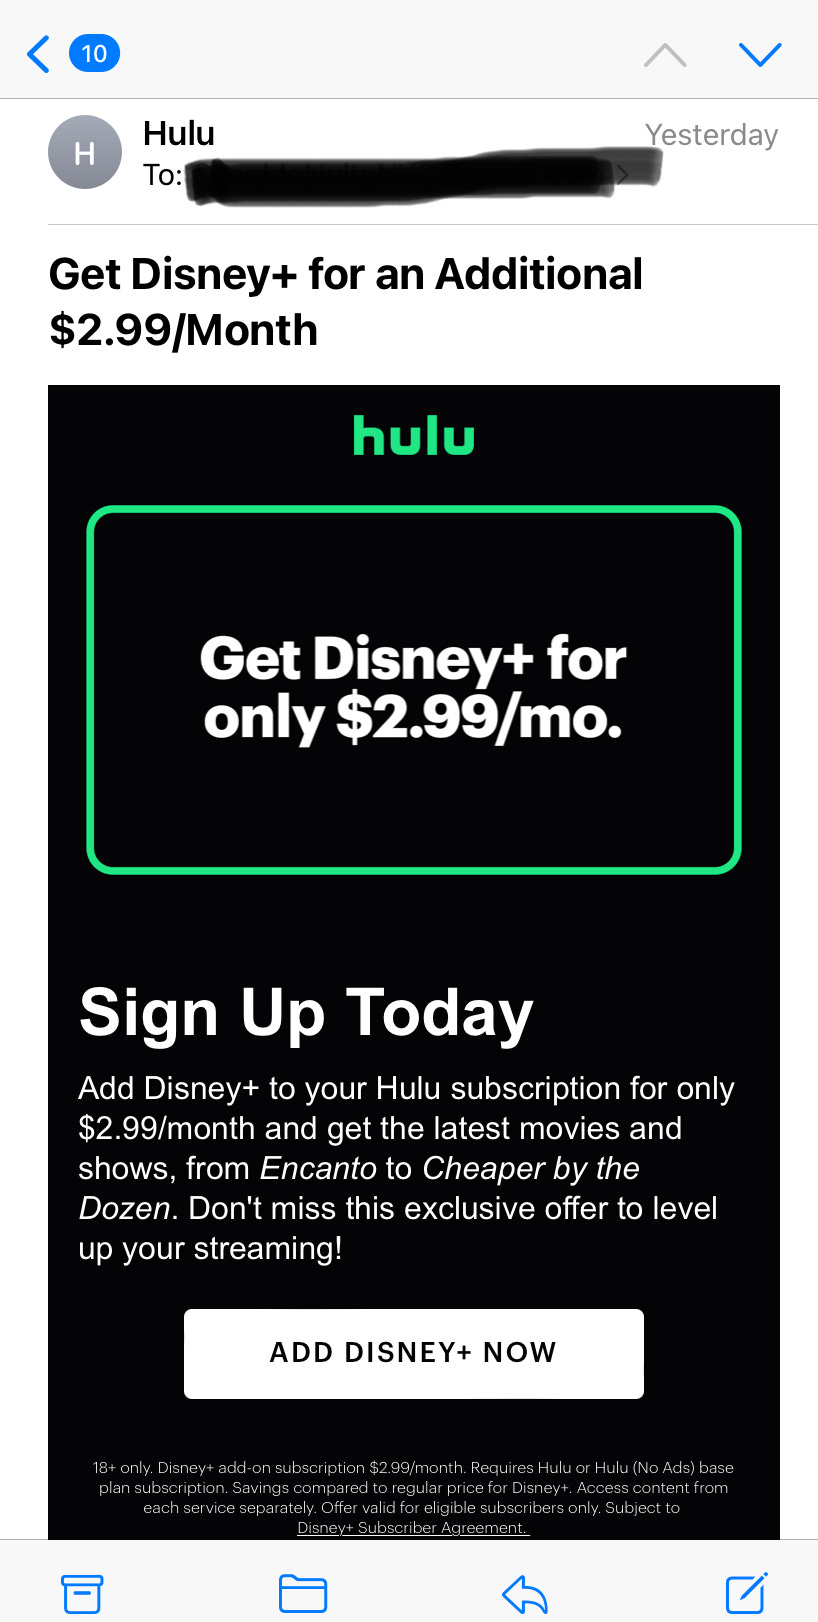 DISNEY+ heavily discounts price for HULU subs to drive US growth